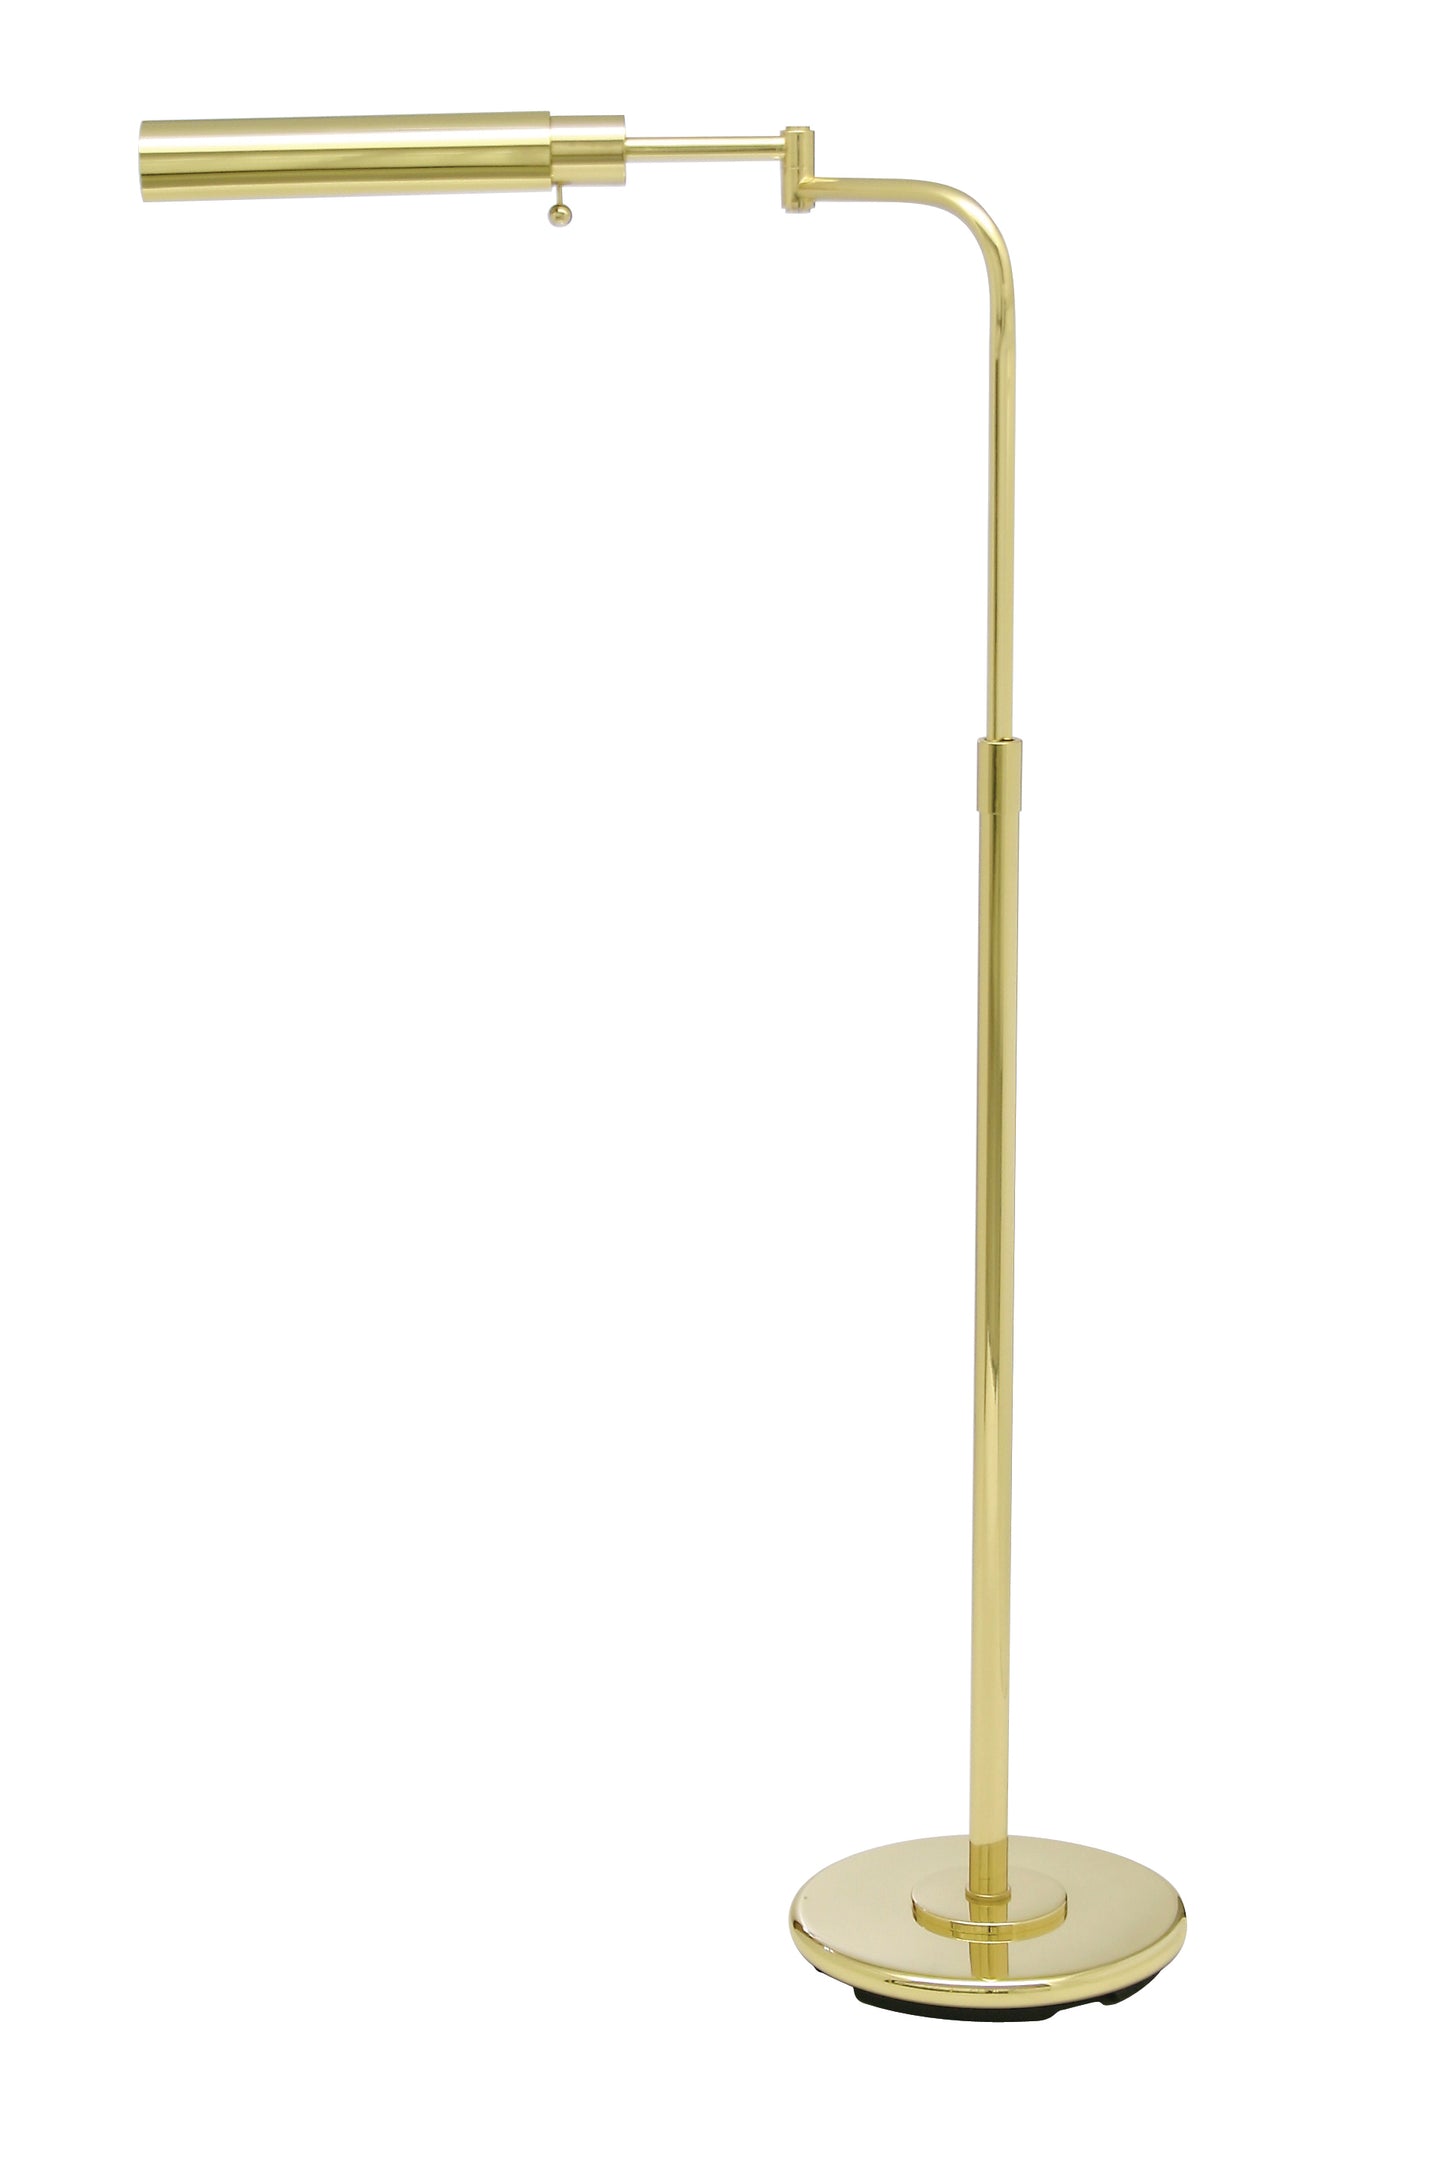 House of Troy Home Office Polished Brass Floor Lamp PH100-61-F